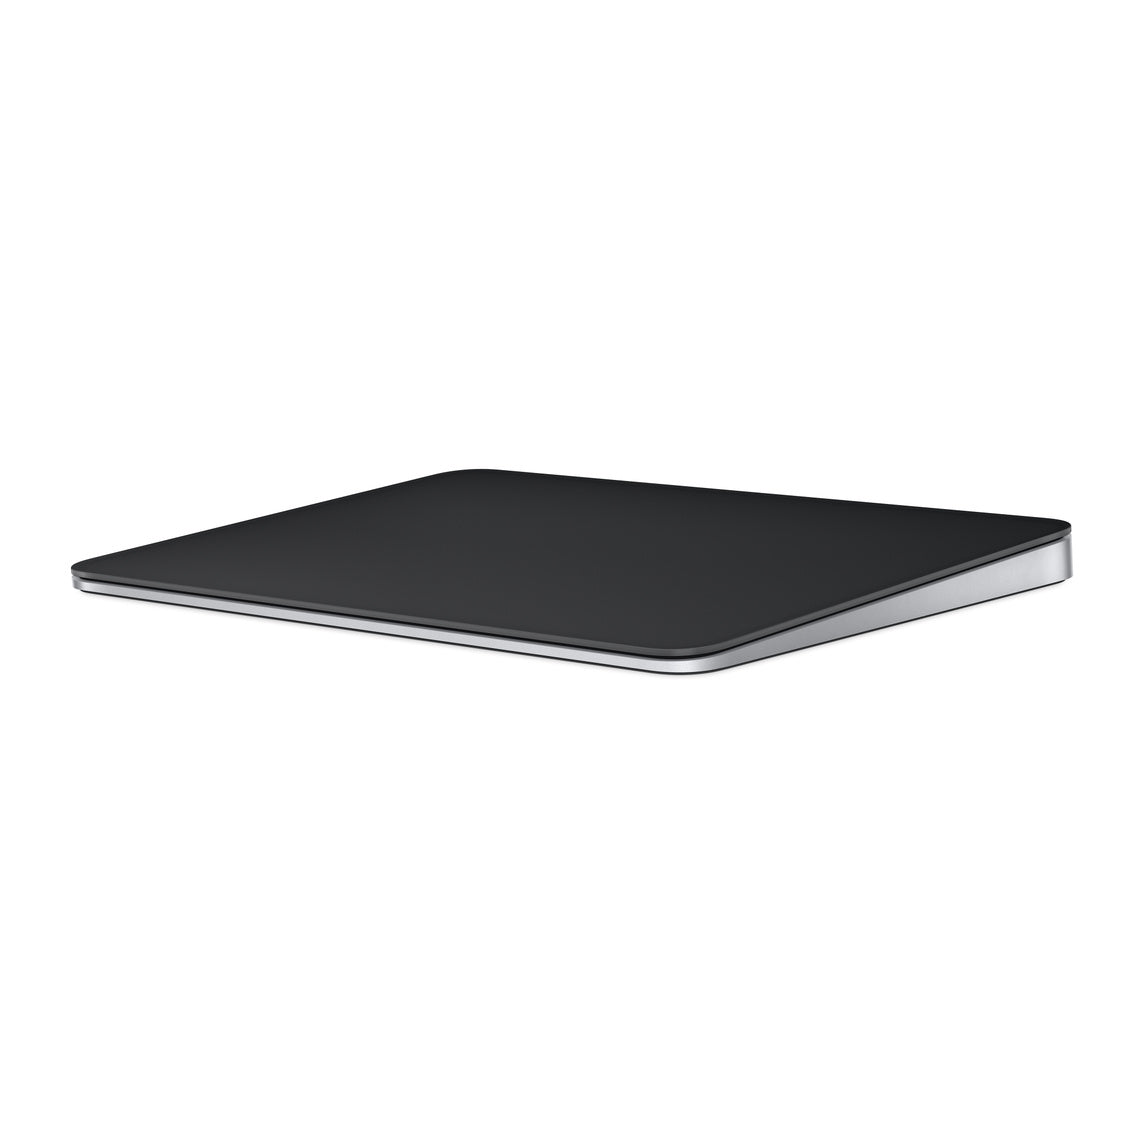 Apple Magic Trackpad - Black Multi-Touch Surface for Macbook & iMac